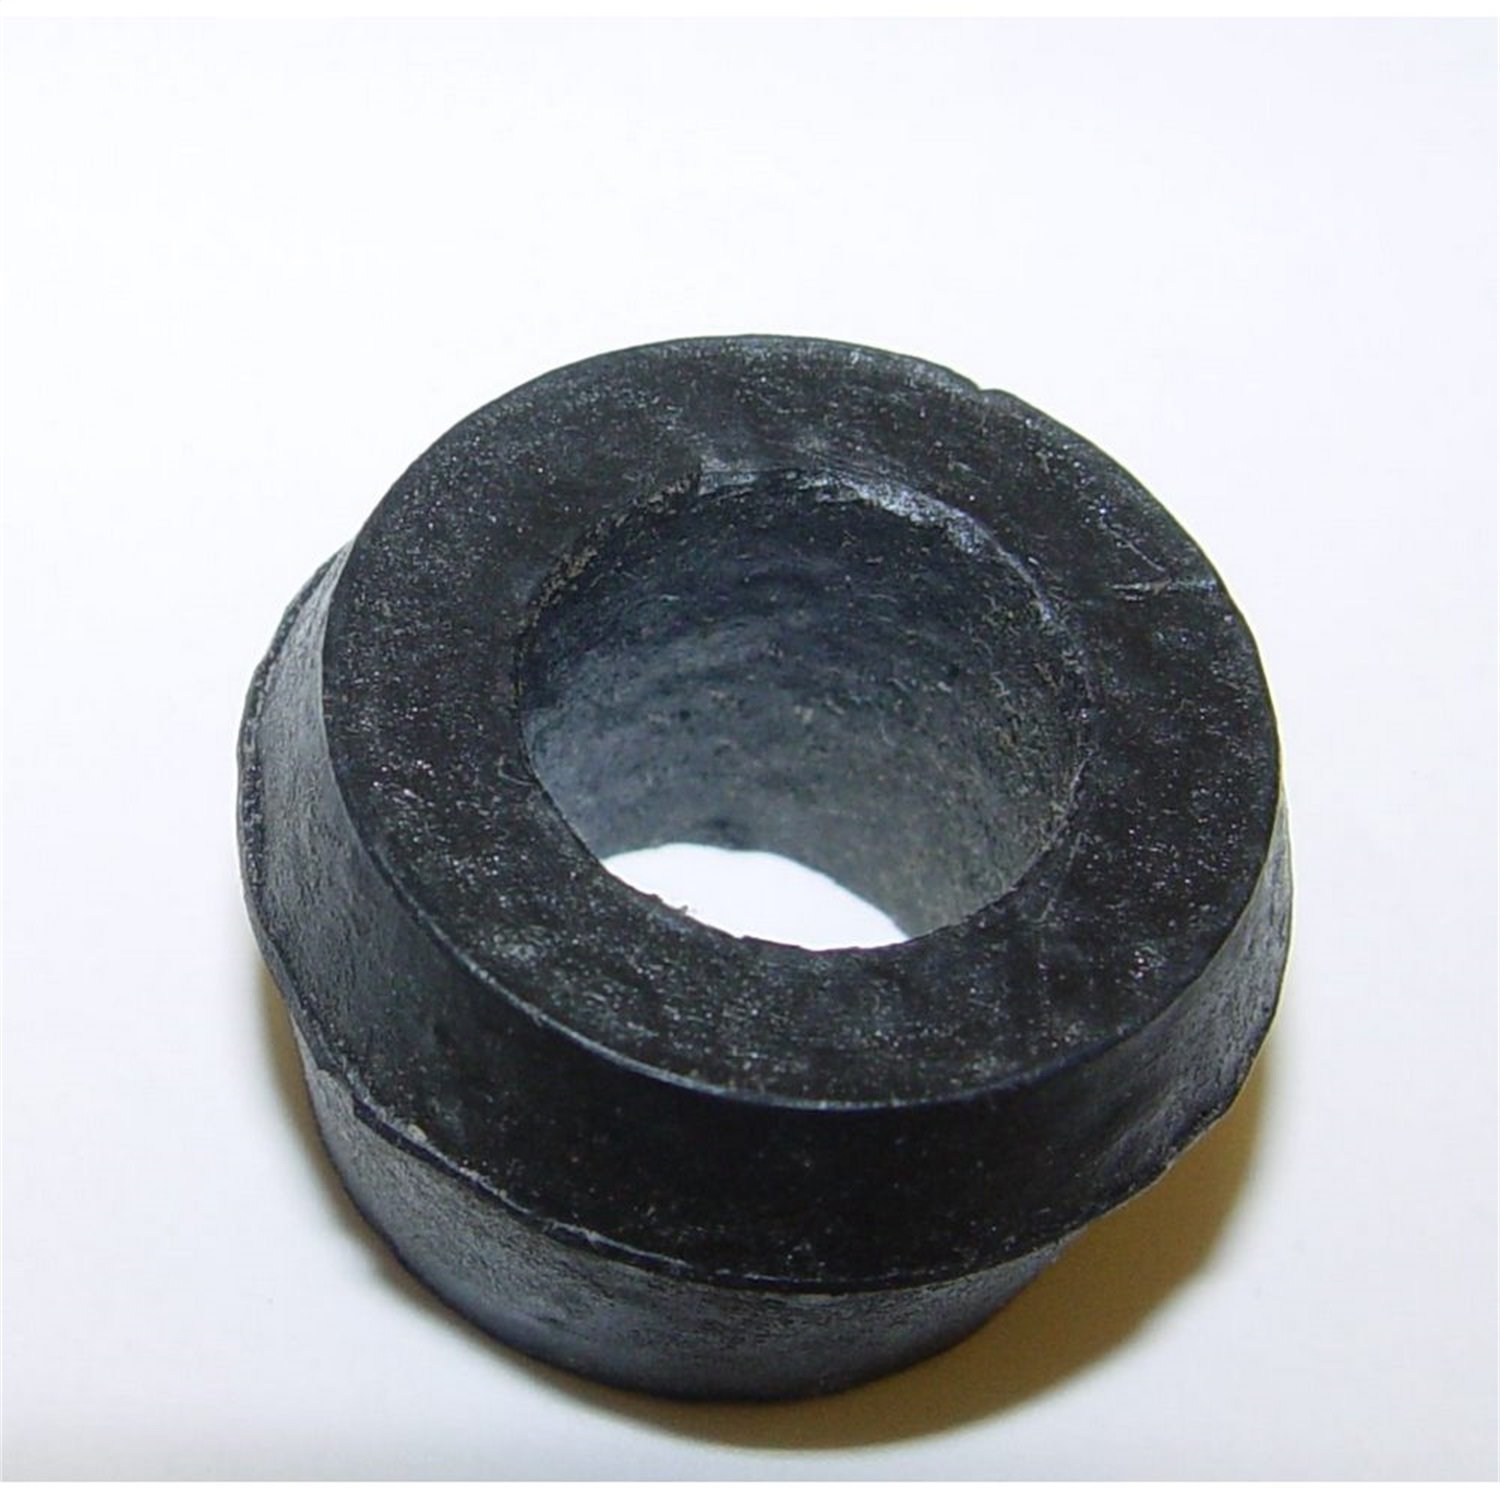 Replacement shock mount bushing from Omix-ADA, Fits 46-86 Willys and Jeep models